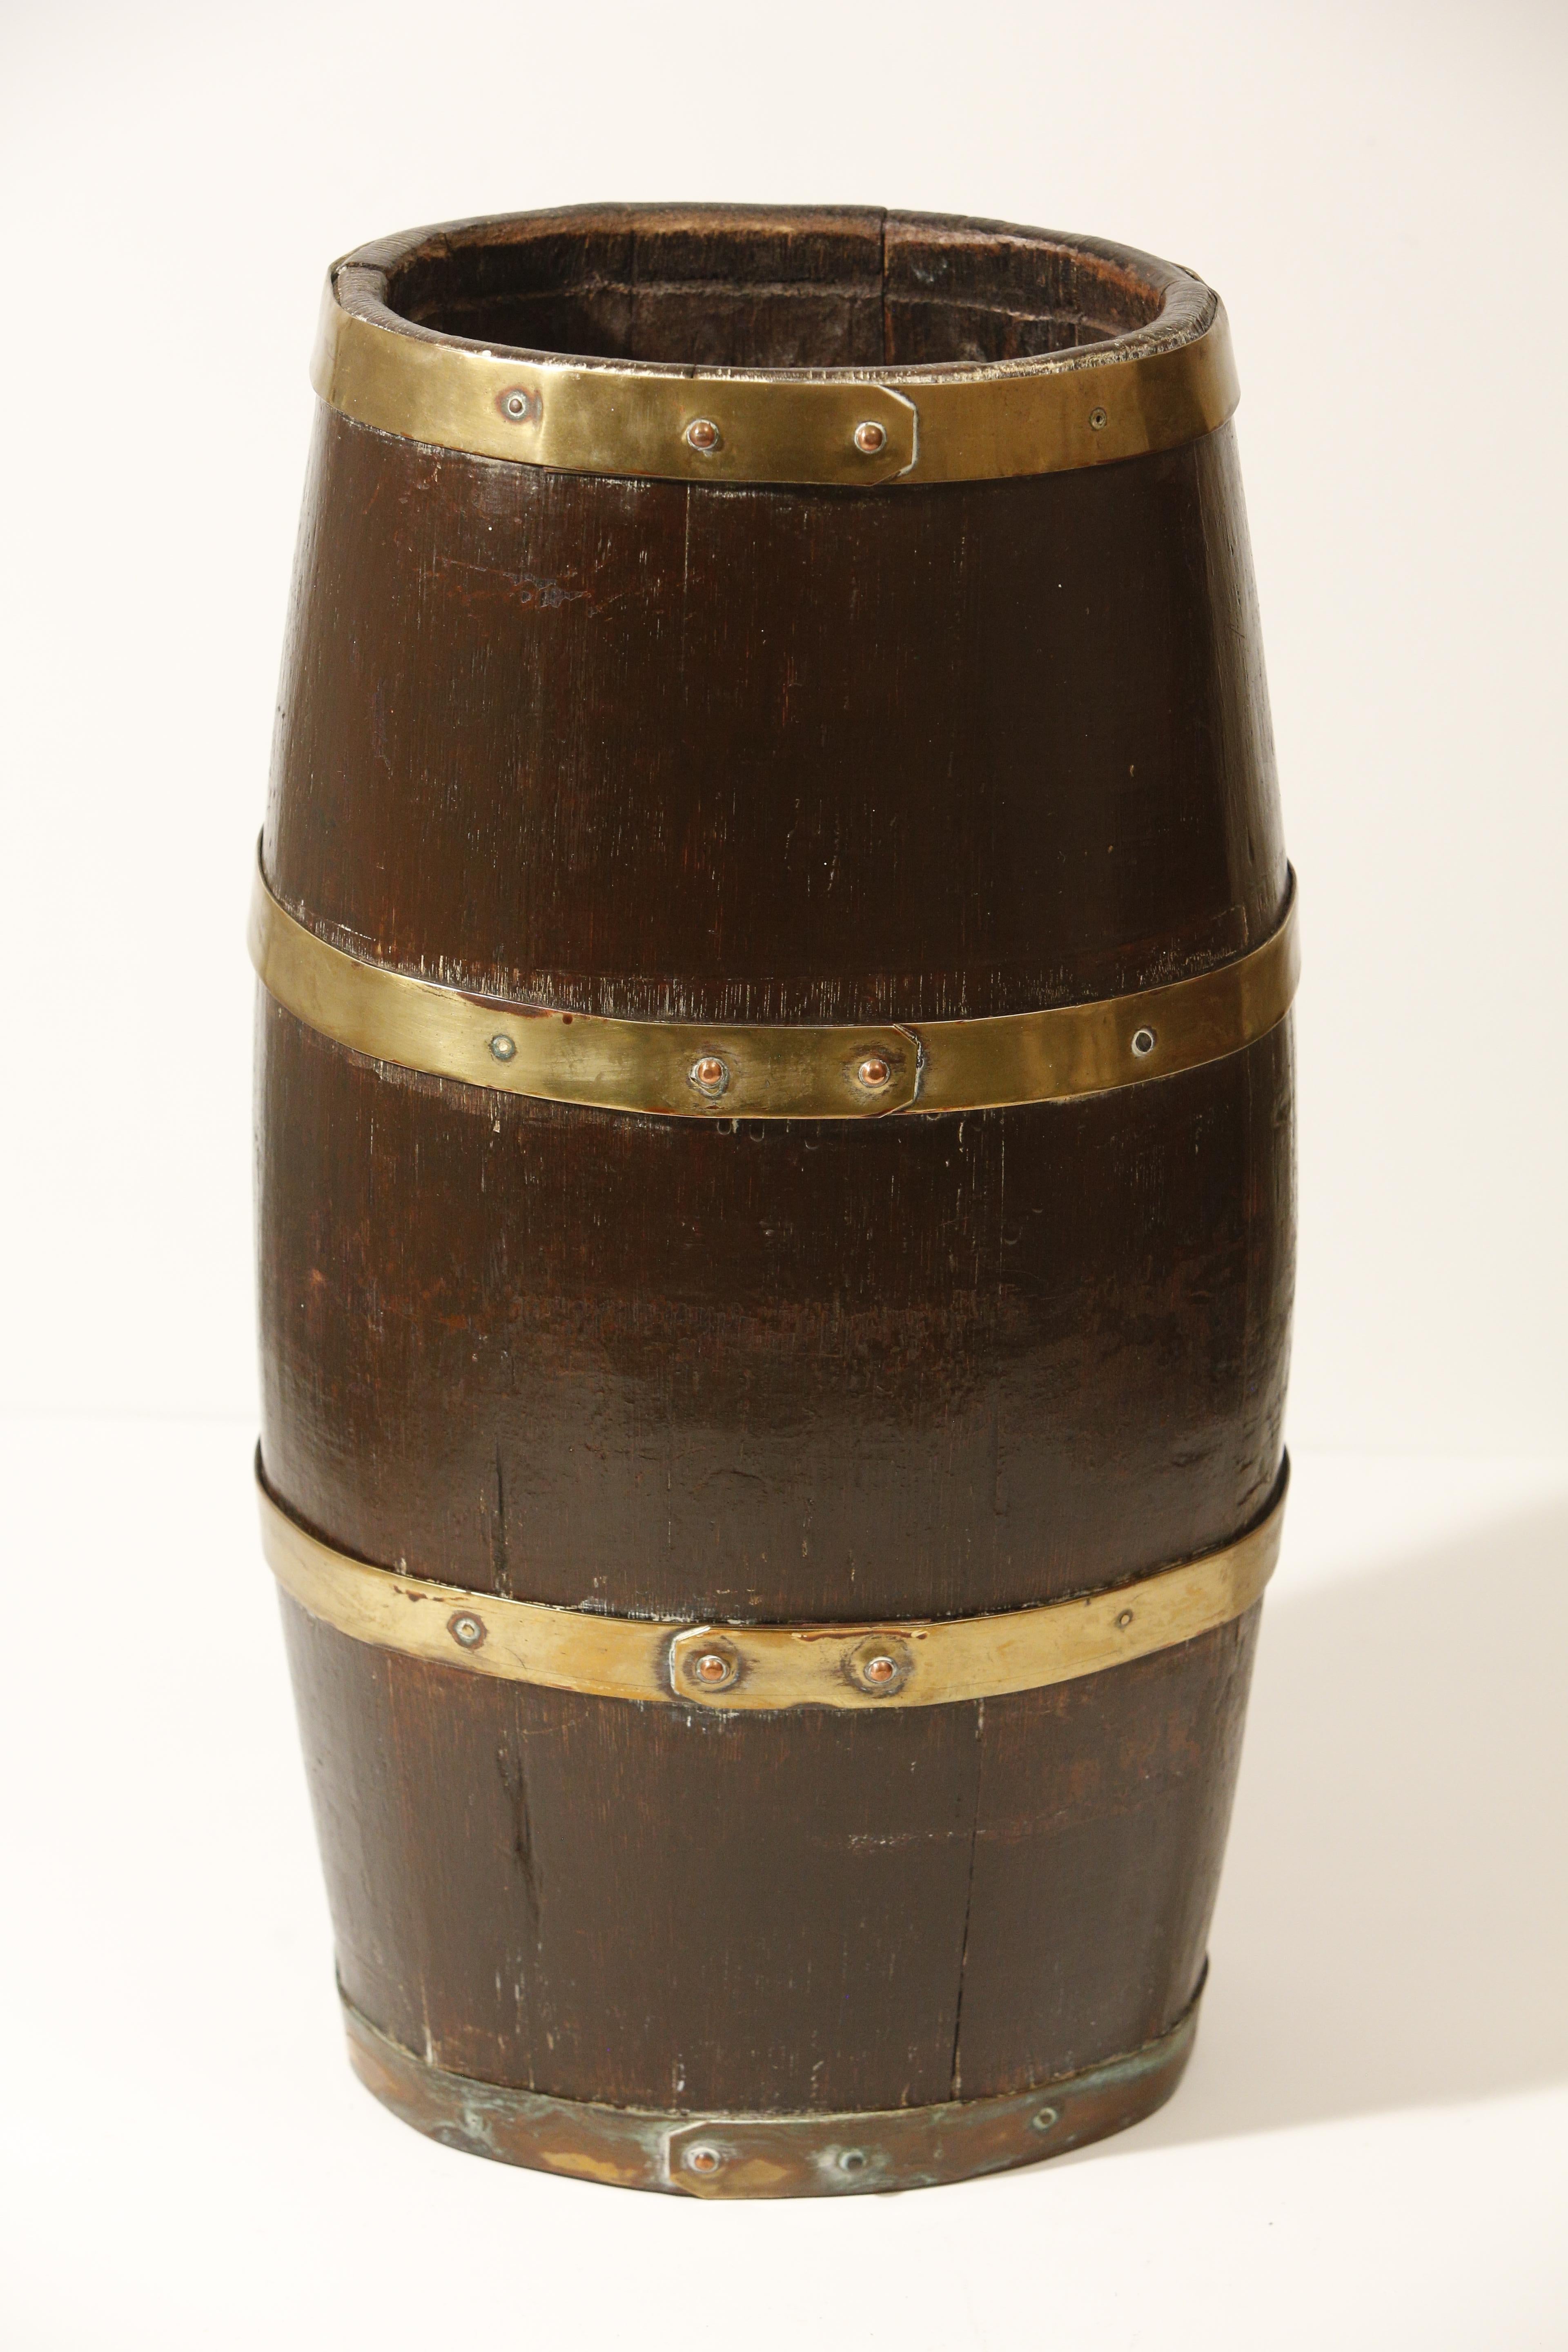 Oak Barrel Umbrella Stand with Brass Braces English Coat of Arms 19th Century For Sale 3